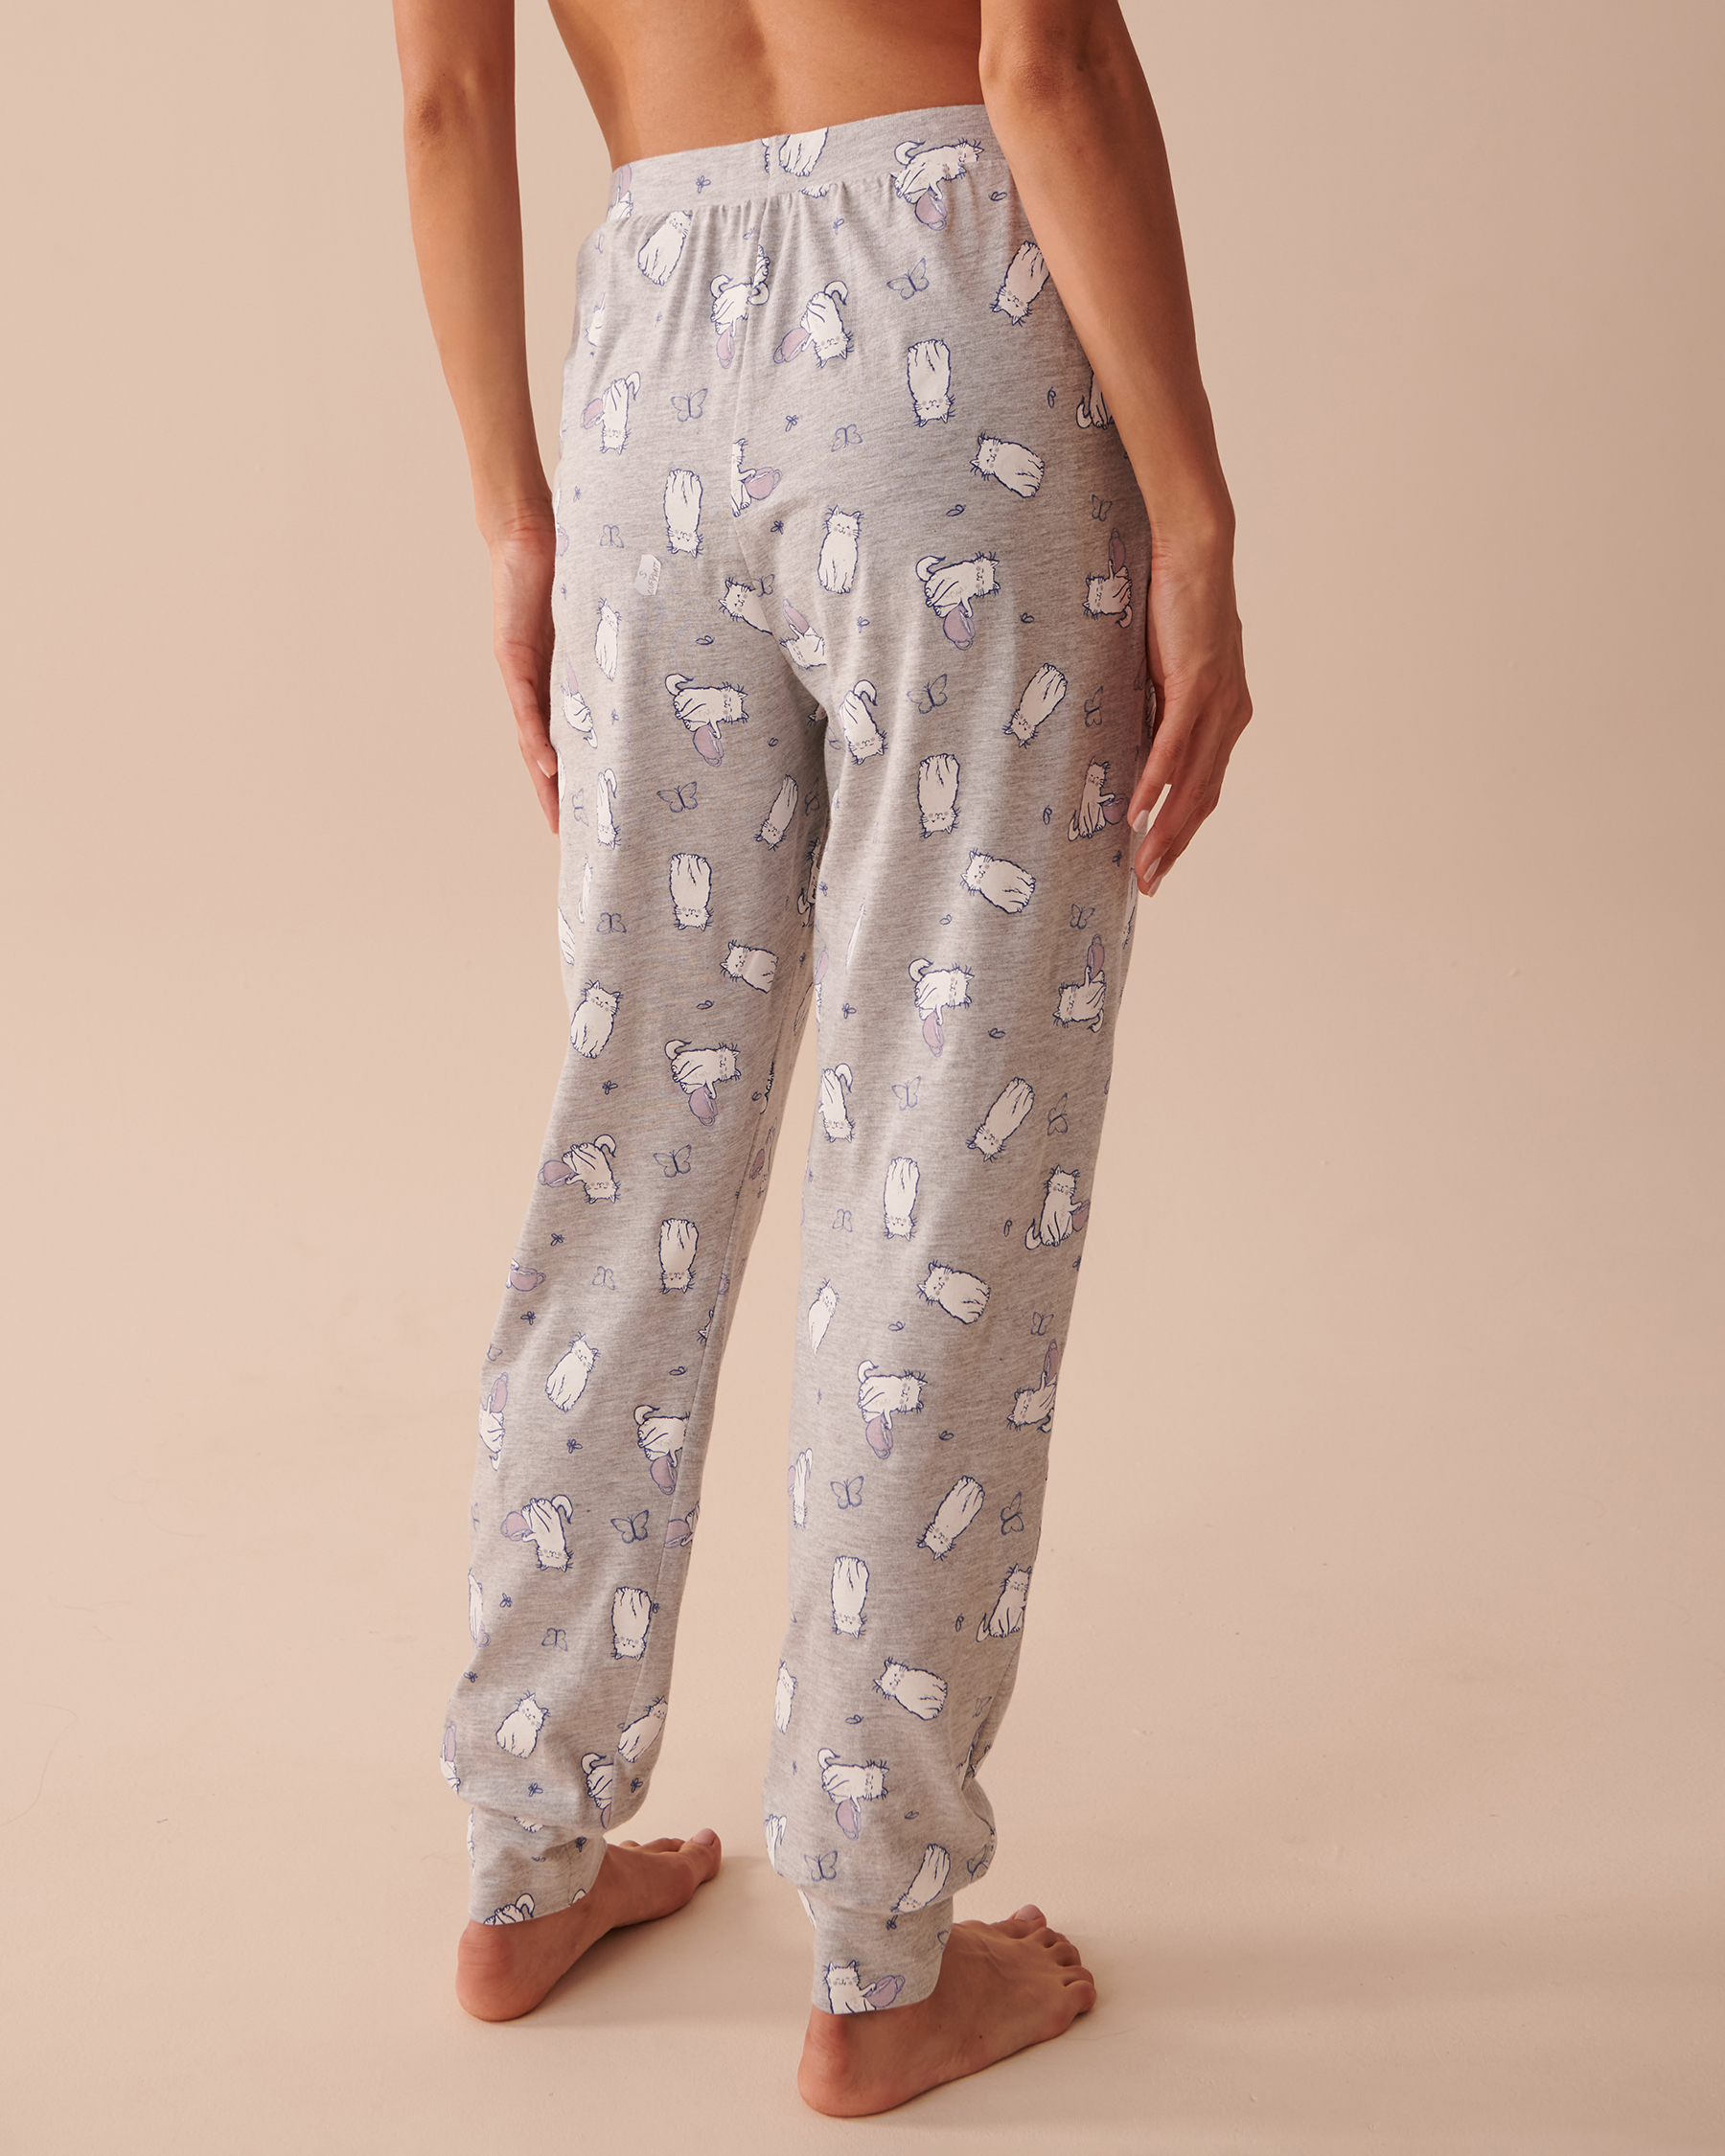 LA VIE EN ROSE Fitted Pajama Pants Cats and Butterflies 40200534 - View2